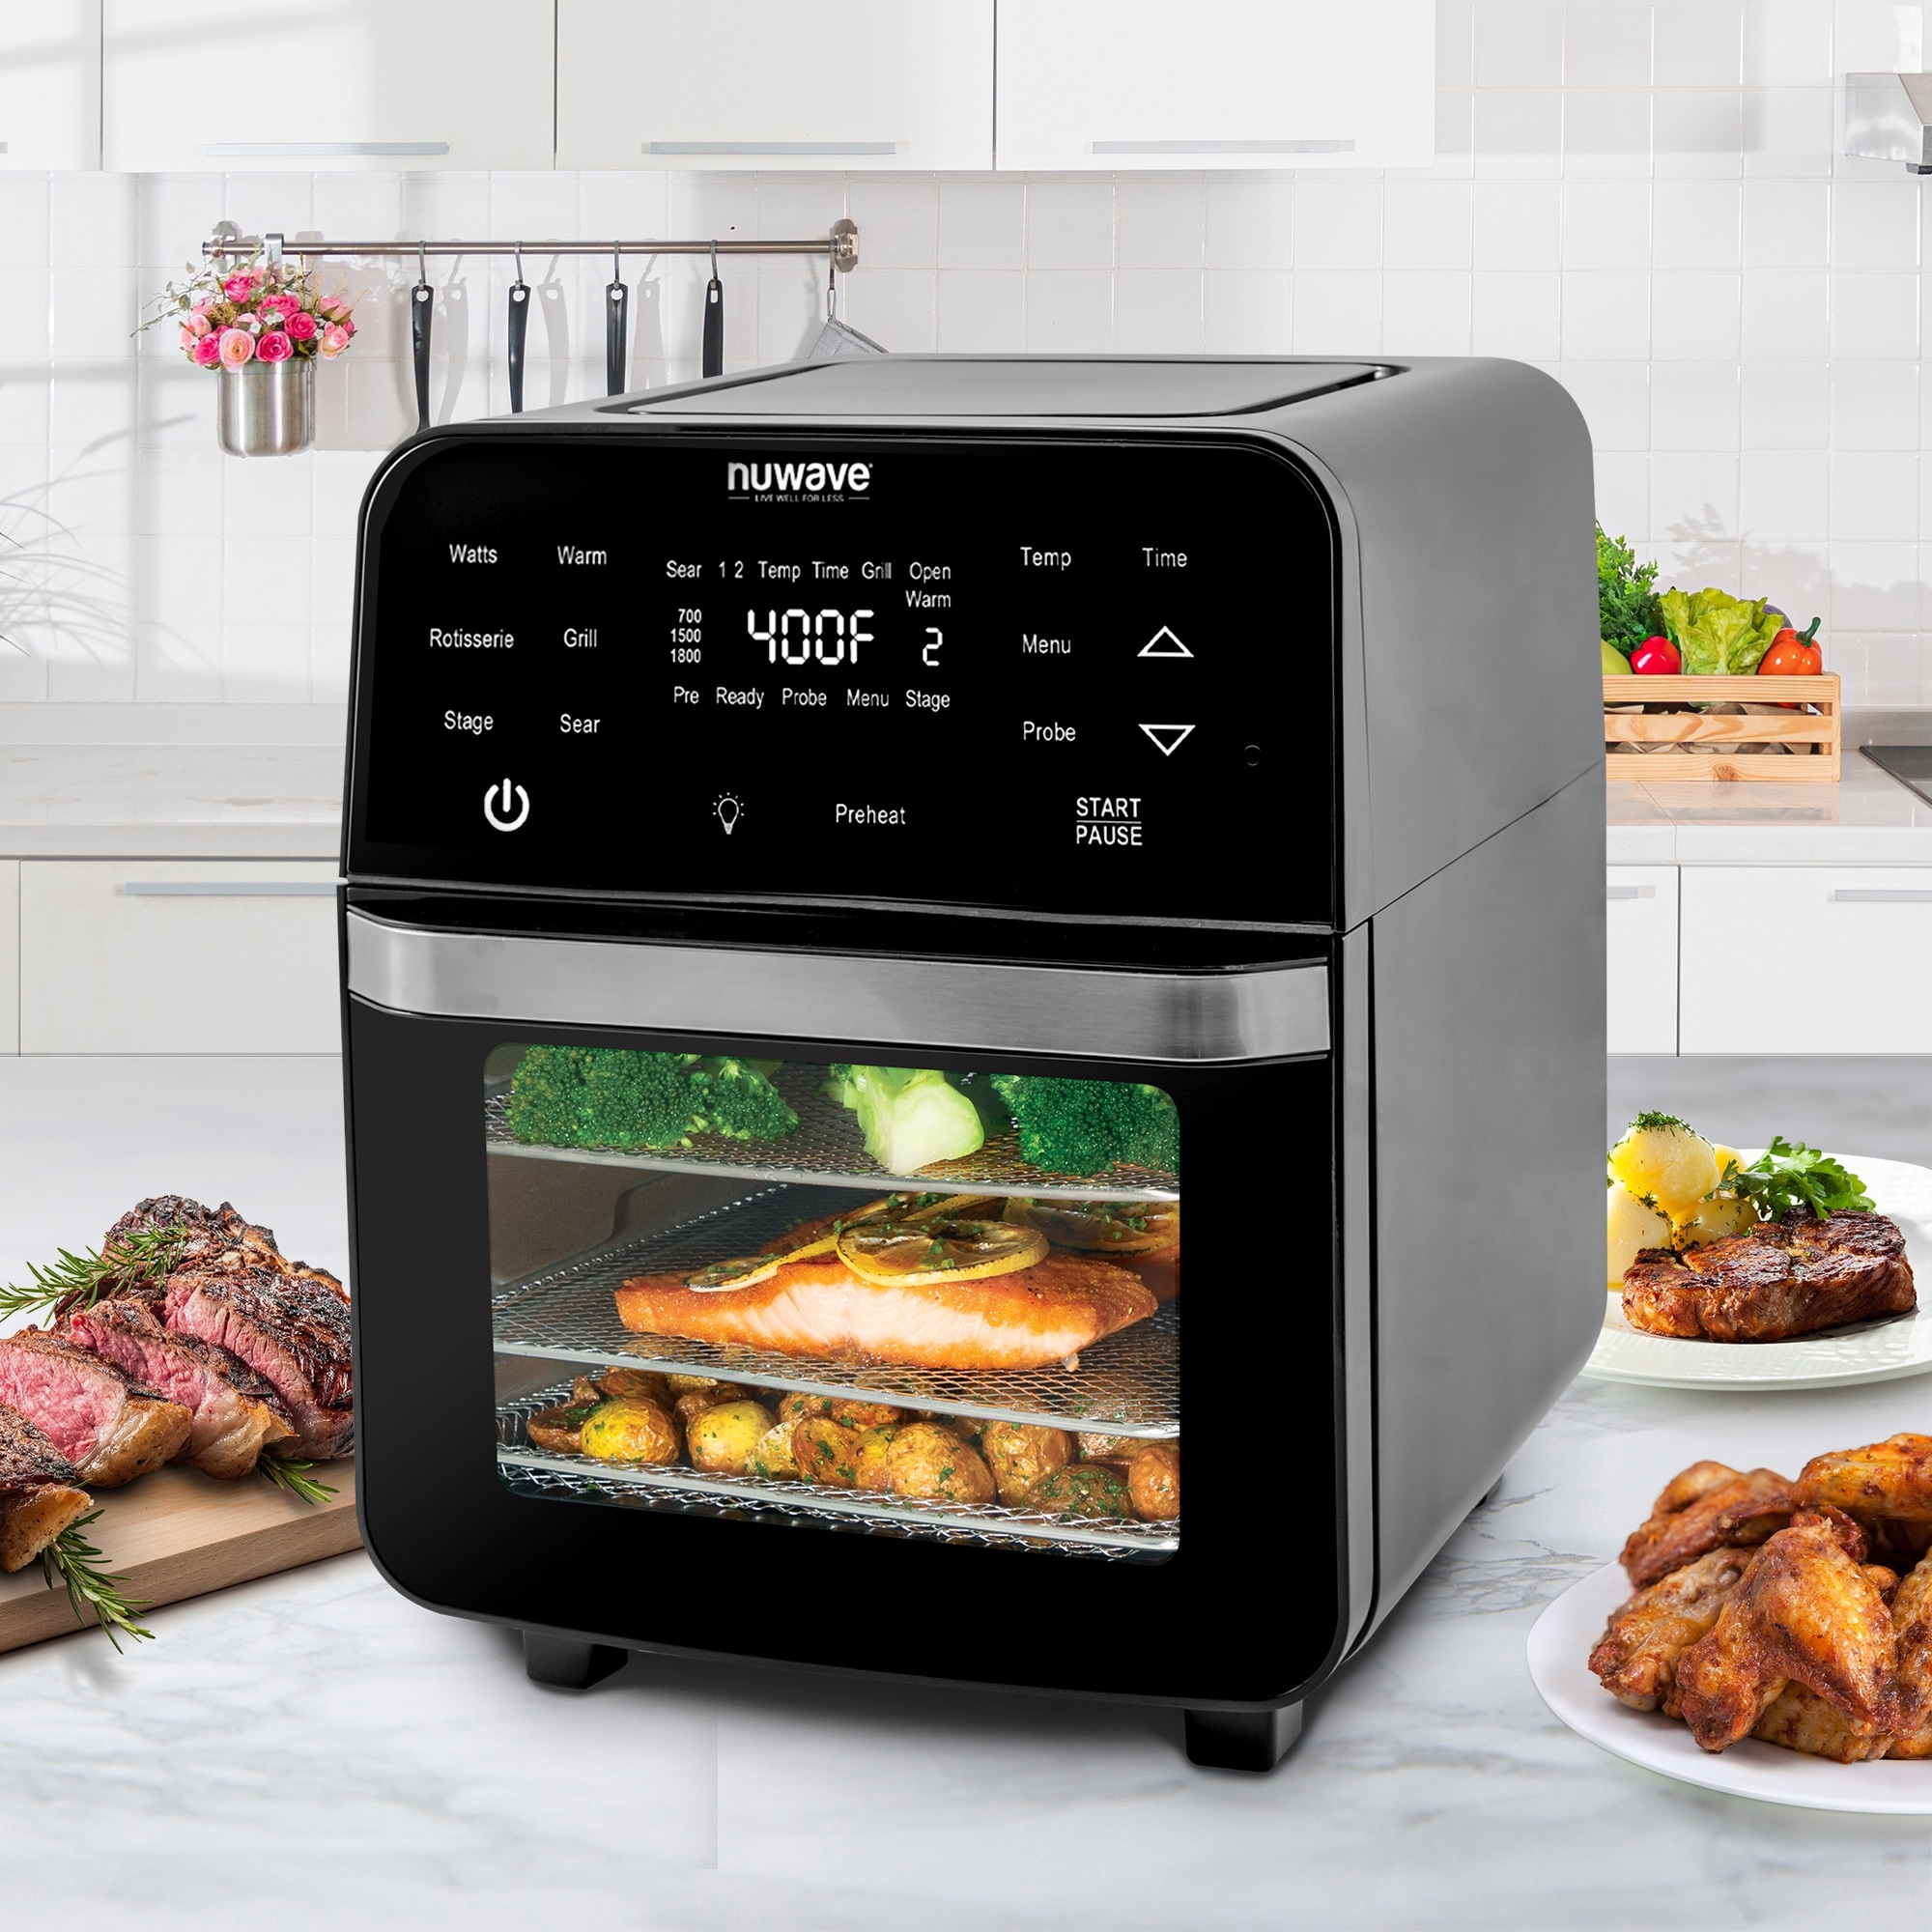 https://ak1.ostkcdn.com/images/products/is/images/direct/35b522dfa77941193fb2408459384235bd398330/NuWave-Brio-15.5-Qt.-Digital-Oven-and-Air-Fryer.jpg